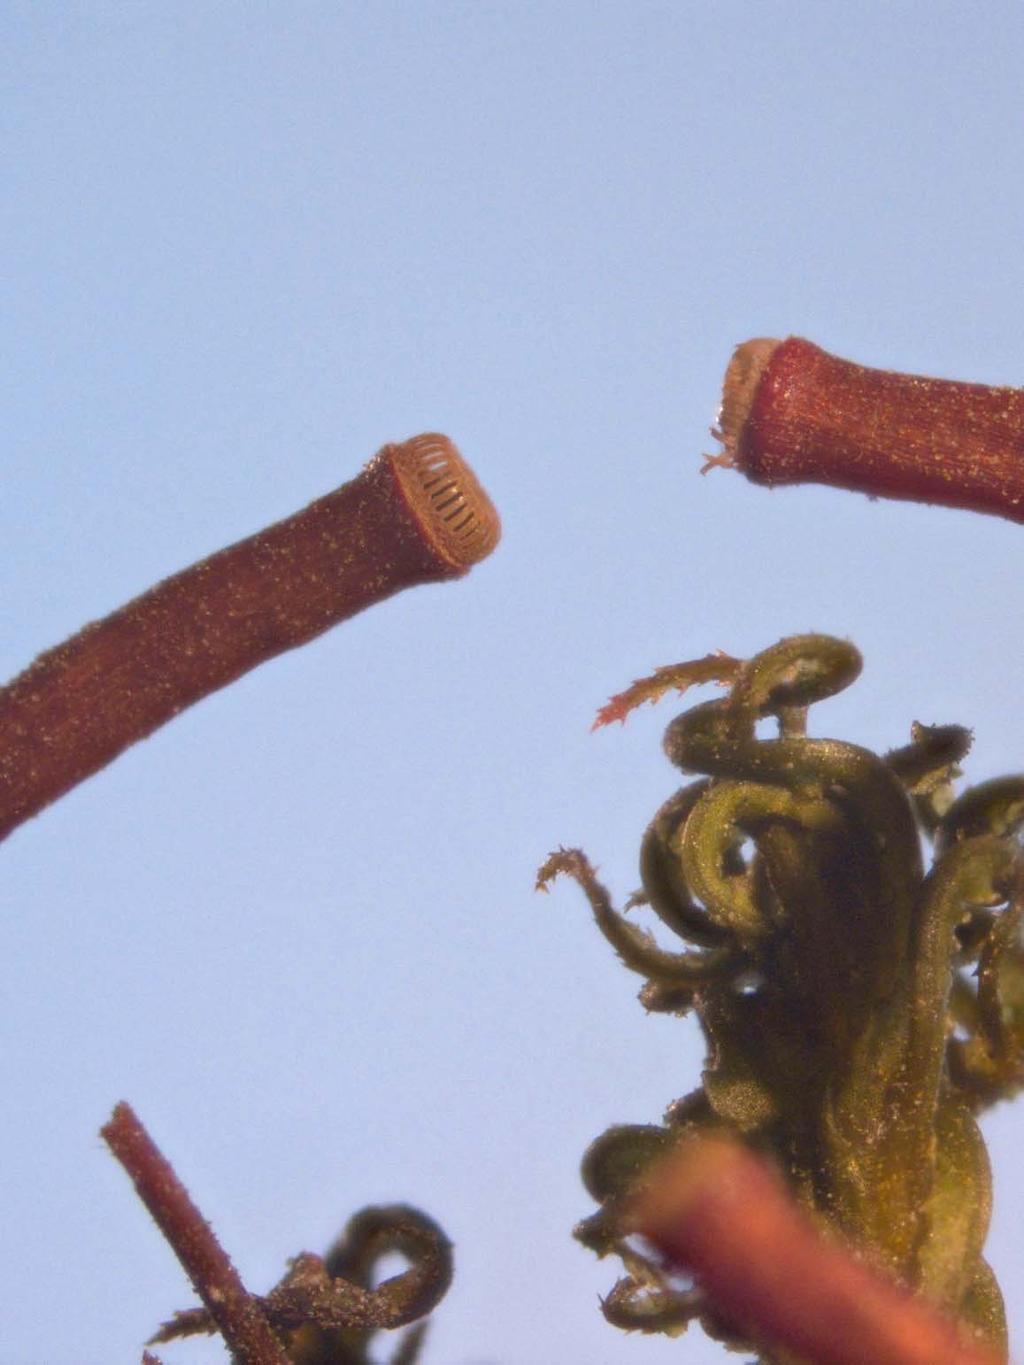 mechanisms, on the surface of Marchantia.